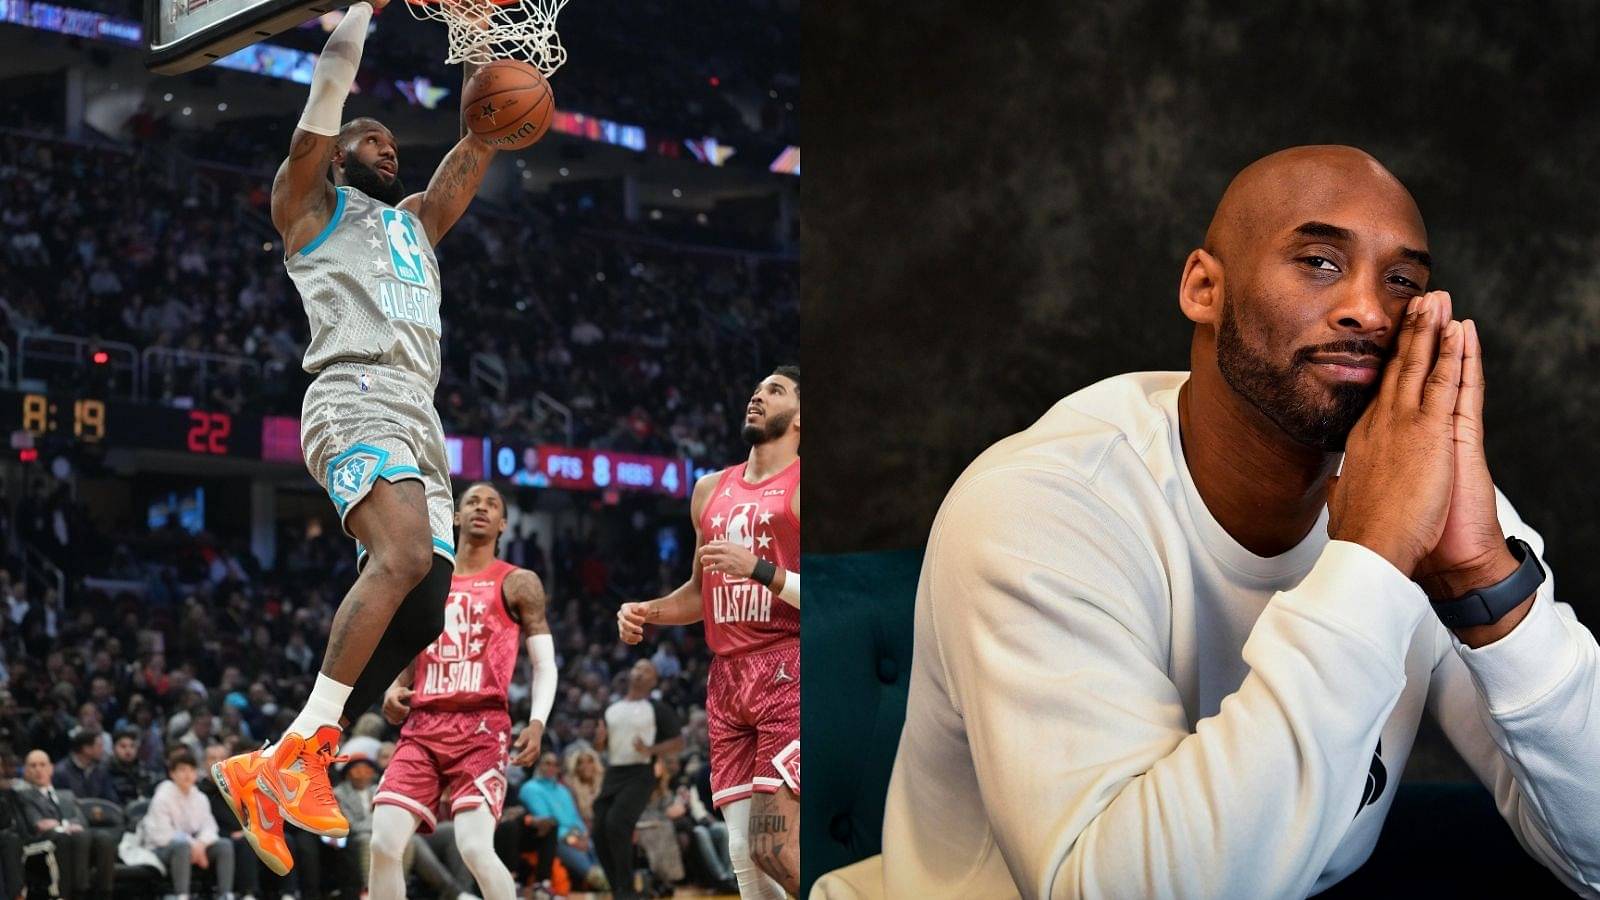 "You guys play harder at a pickup game at UCLA, and it ain’t billion of people watching": Kobe Bryant let his disappointment known to the NBA players for playing the All-Star games for fun